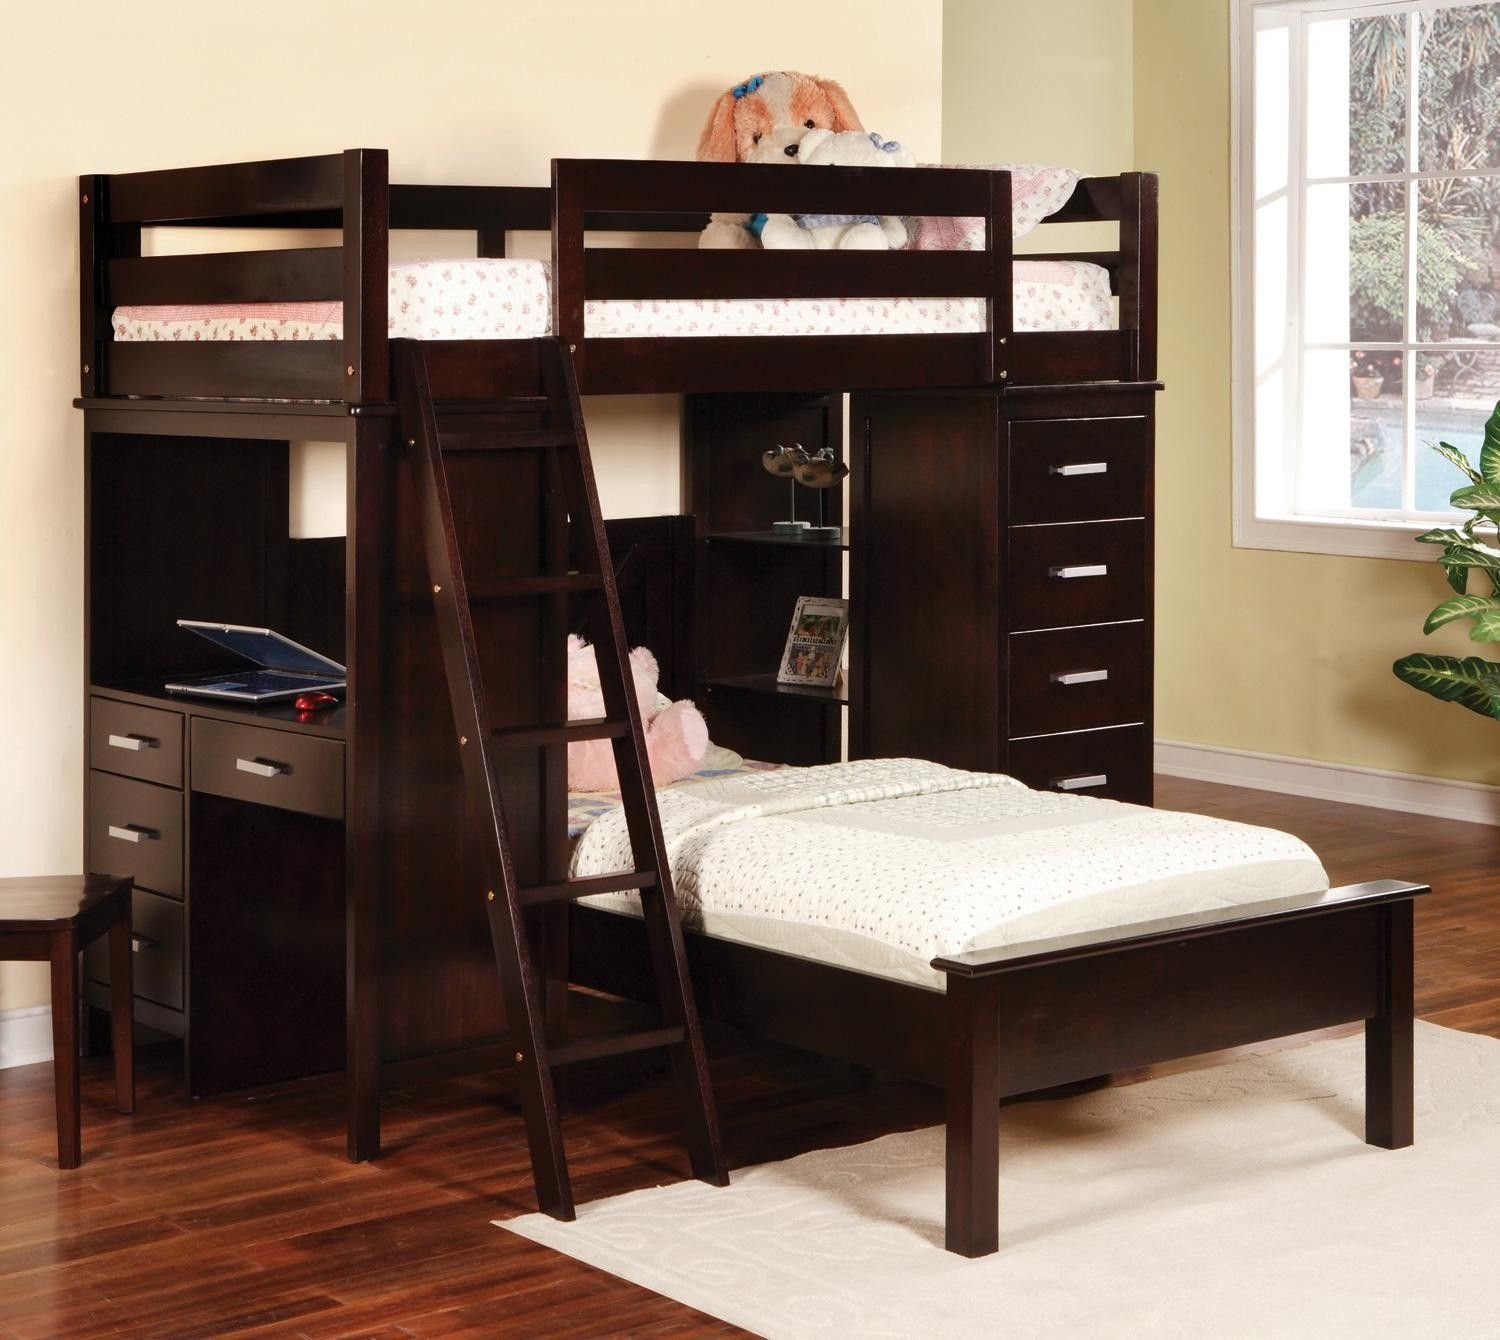 L shaped bunk beds for kids